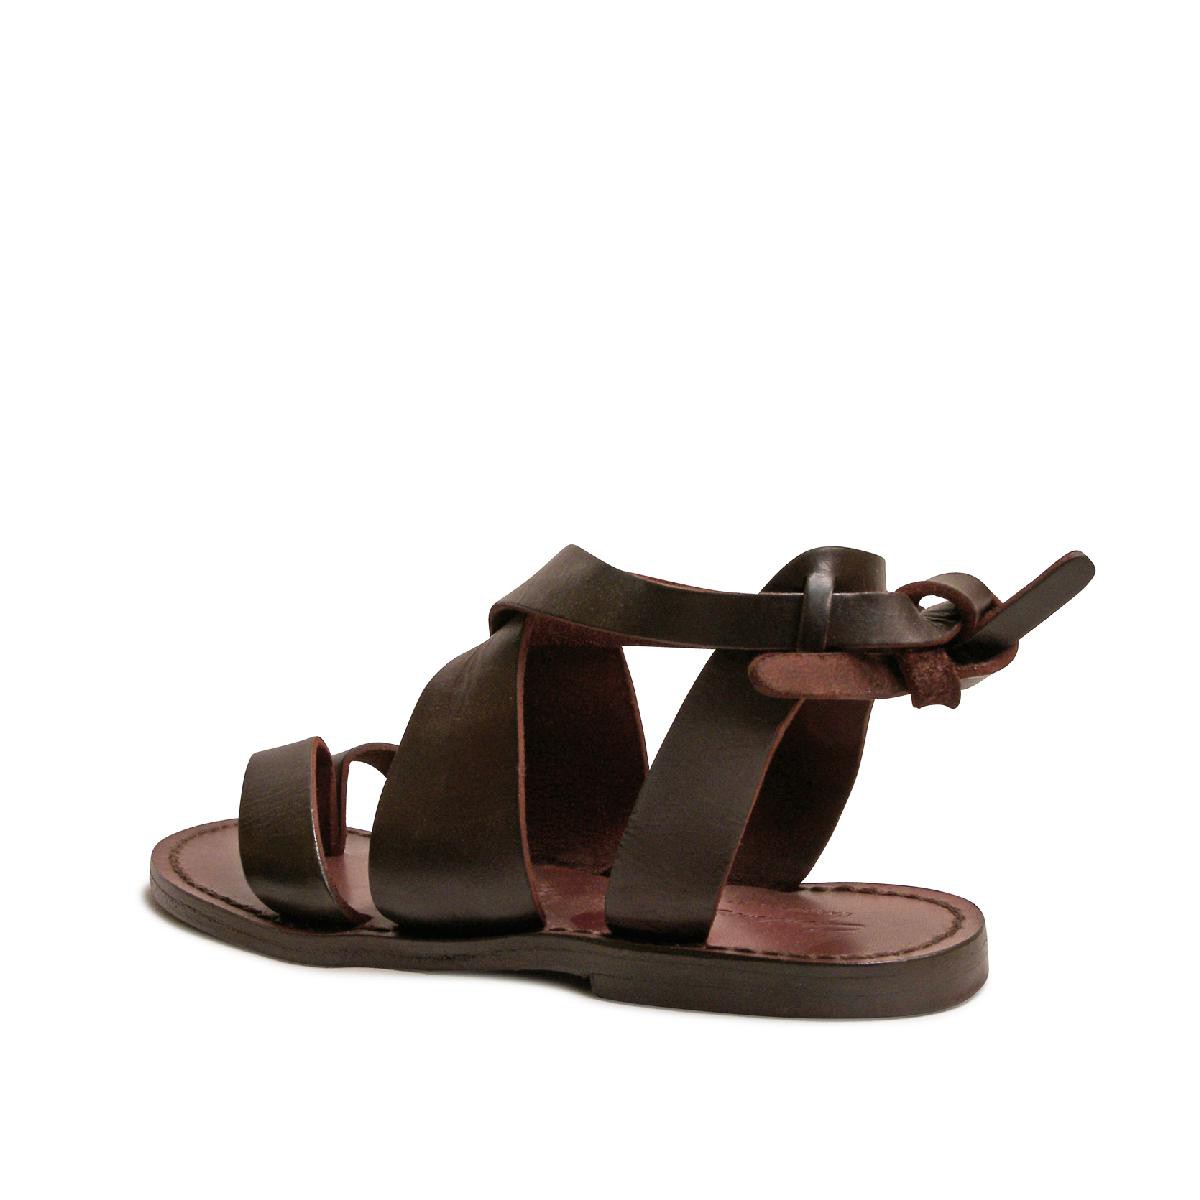 Women sandals in Dark Brown Leather handmade in Italy | The leather